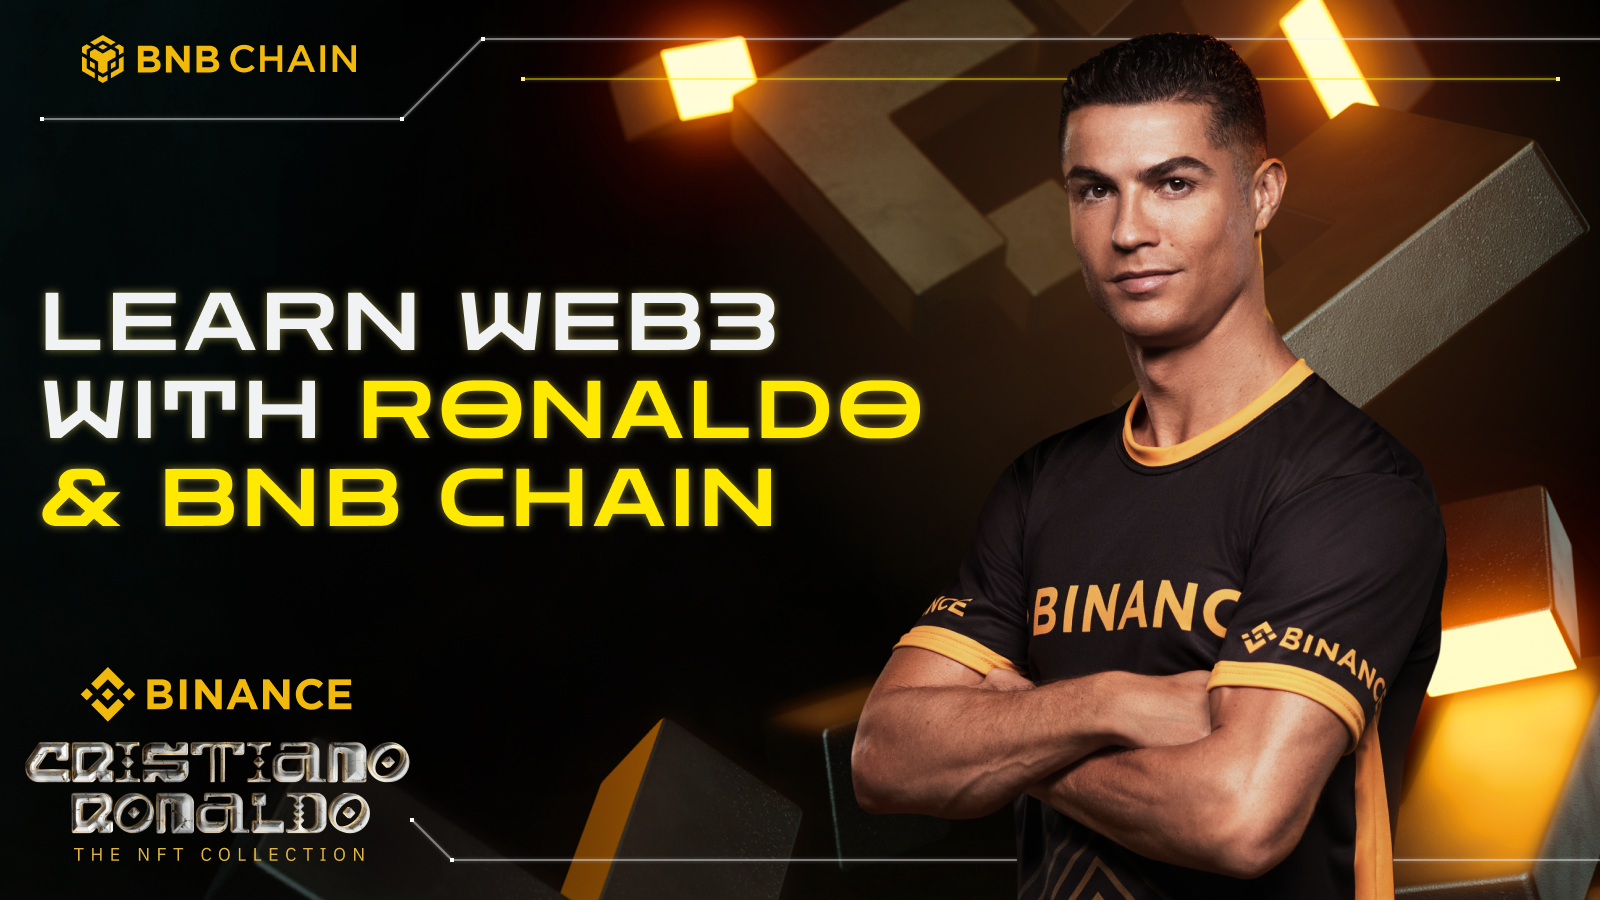 Learn Web3 with Ronaldo and BNB Chain